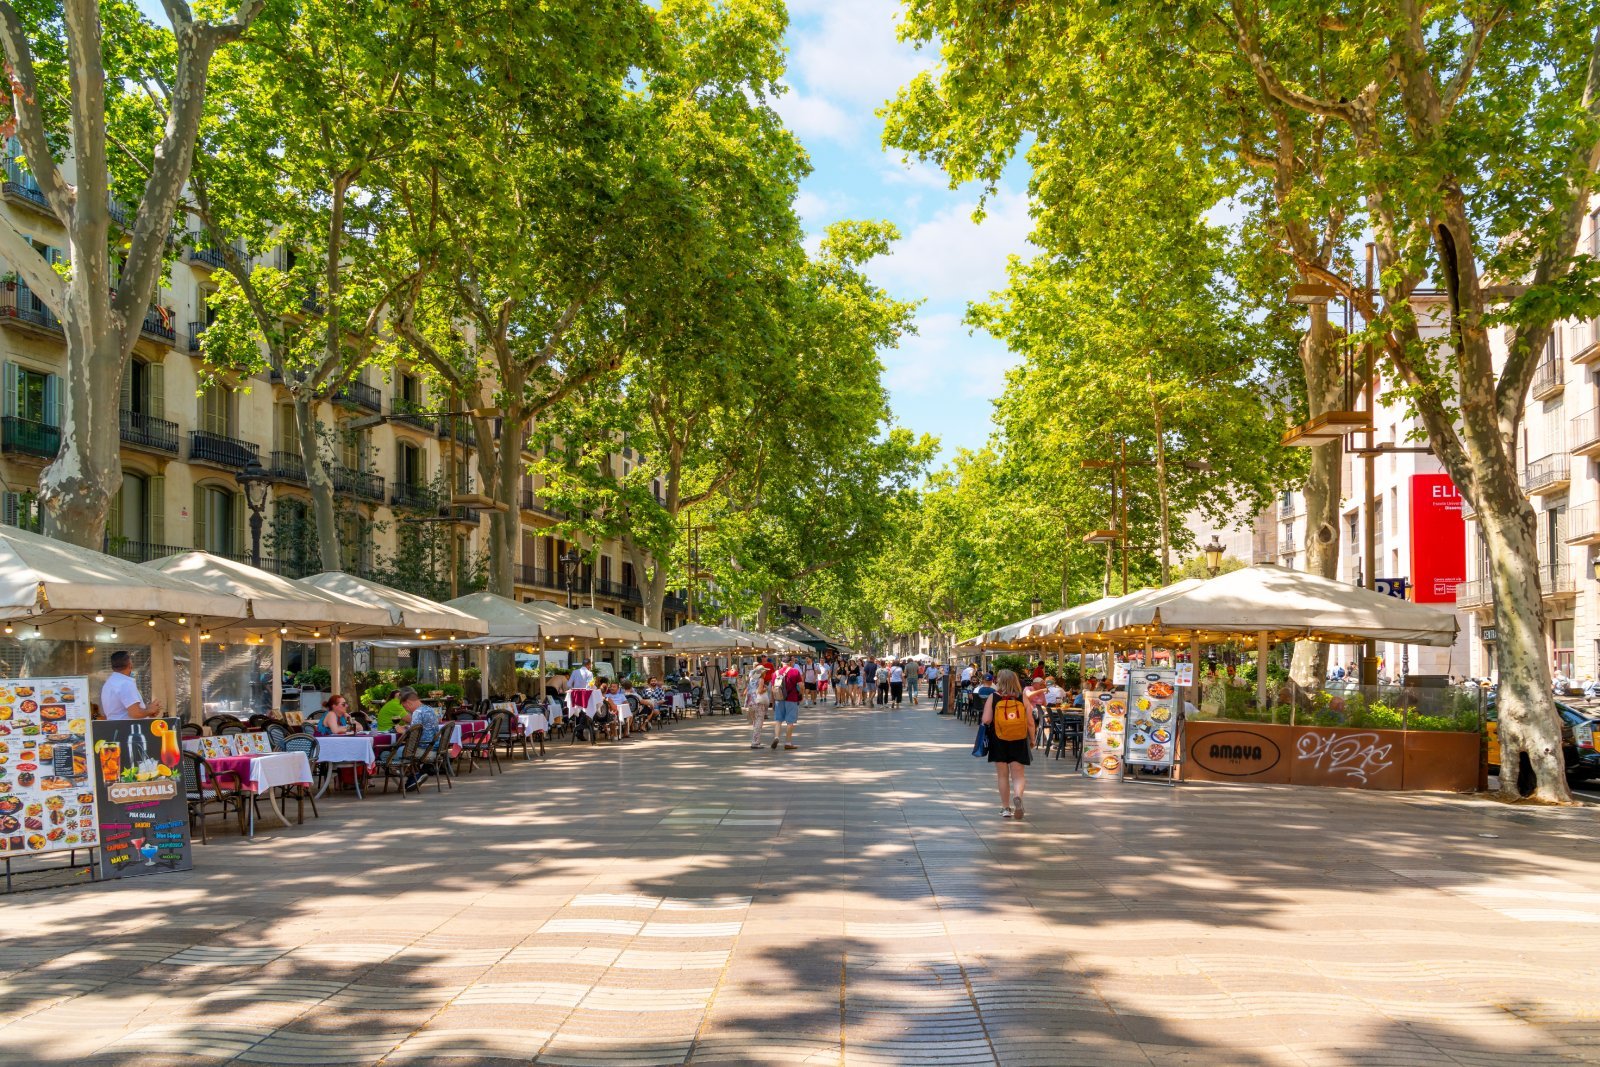 <p class="wp-caption-text">Image Credit: Shutterstock / Kirk Fisher</p>  <p>In cities like Barcelona and Madrid, there’s a growing backlash against American tourists who ignore local customs such as siestas, creating noise and disturbance during sacred rest hours.</p>